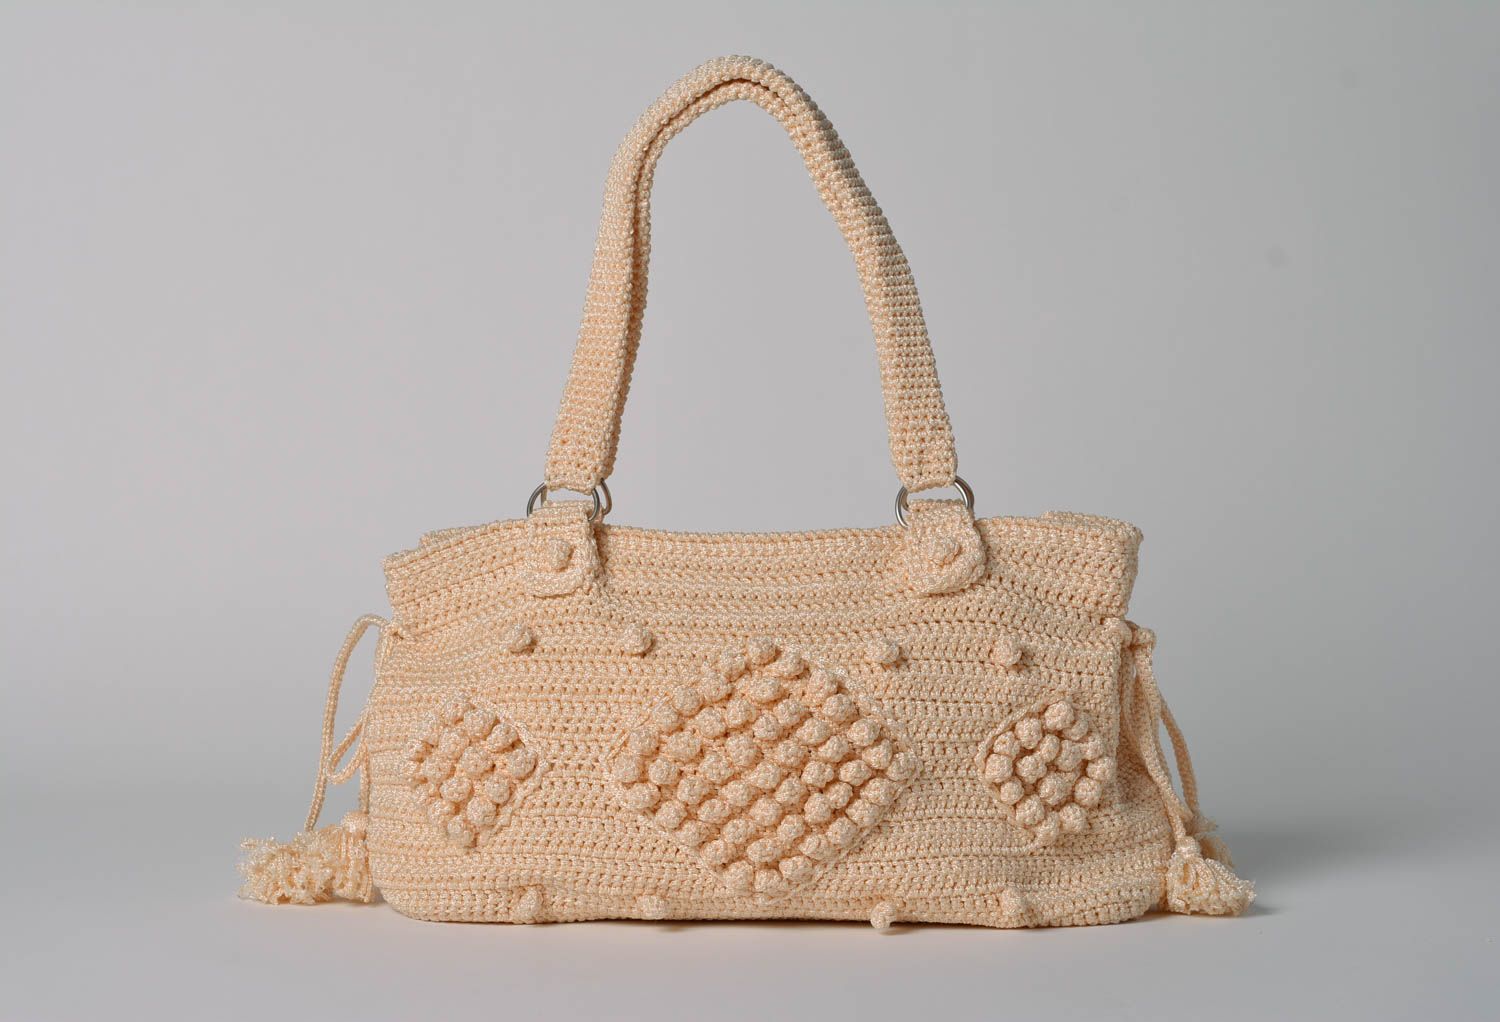 Crocheted female handbag of beige color with two handles summer stylish purse photo 1